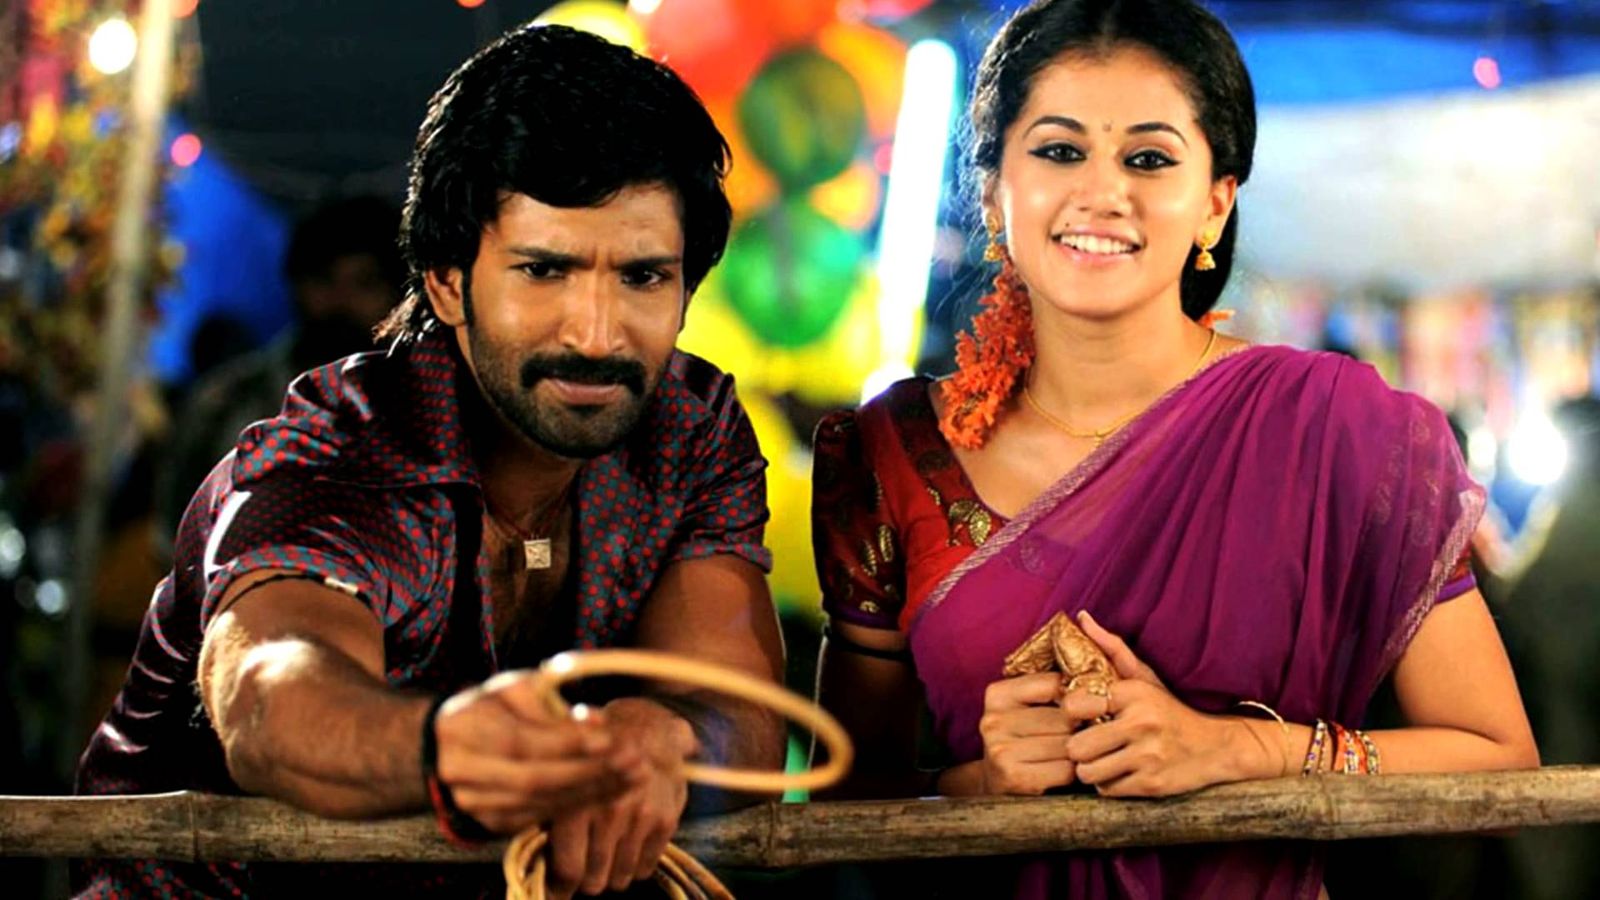 Aadhi And Tapsee Pannu To Reunite For Hari's Next Flick